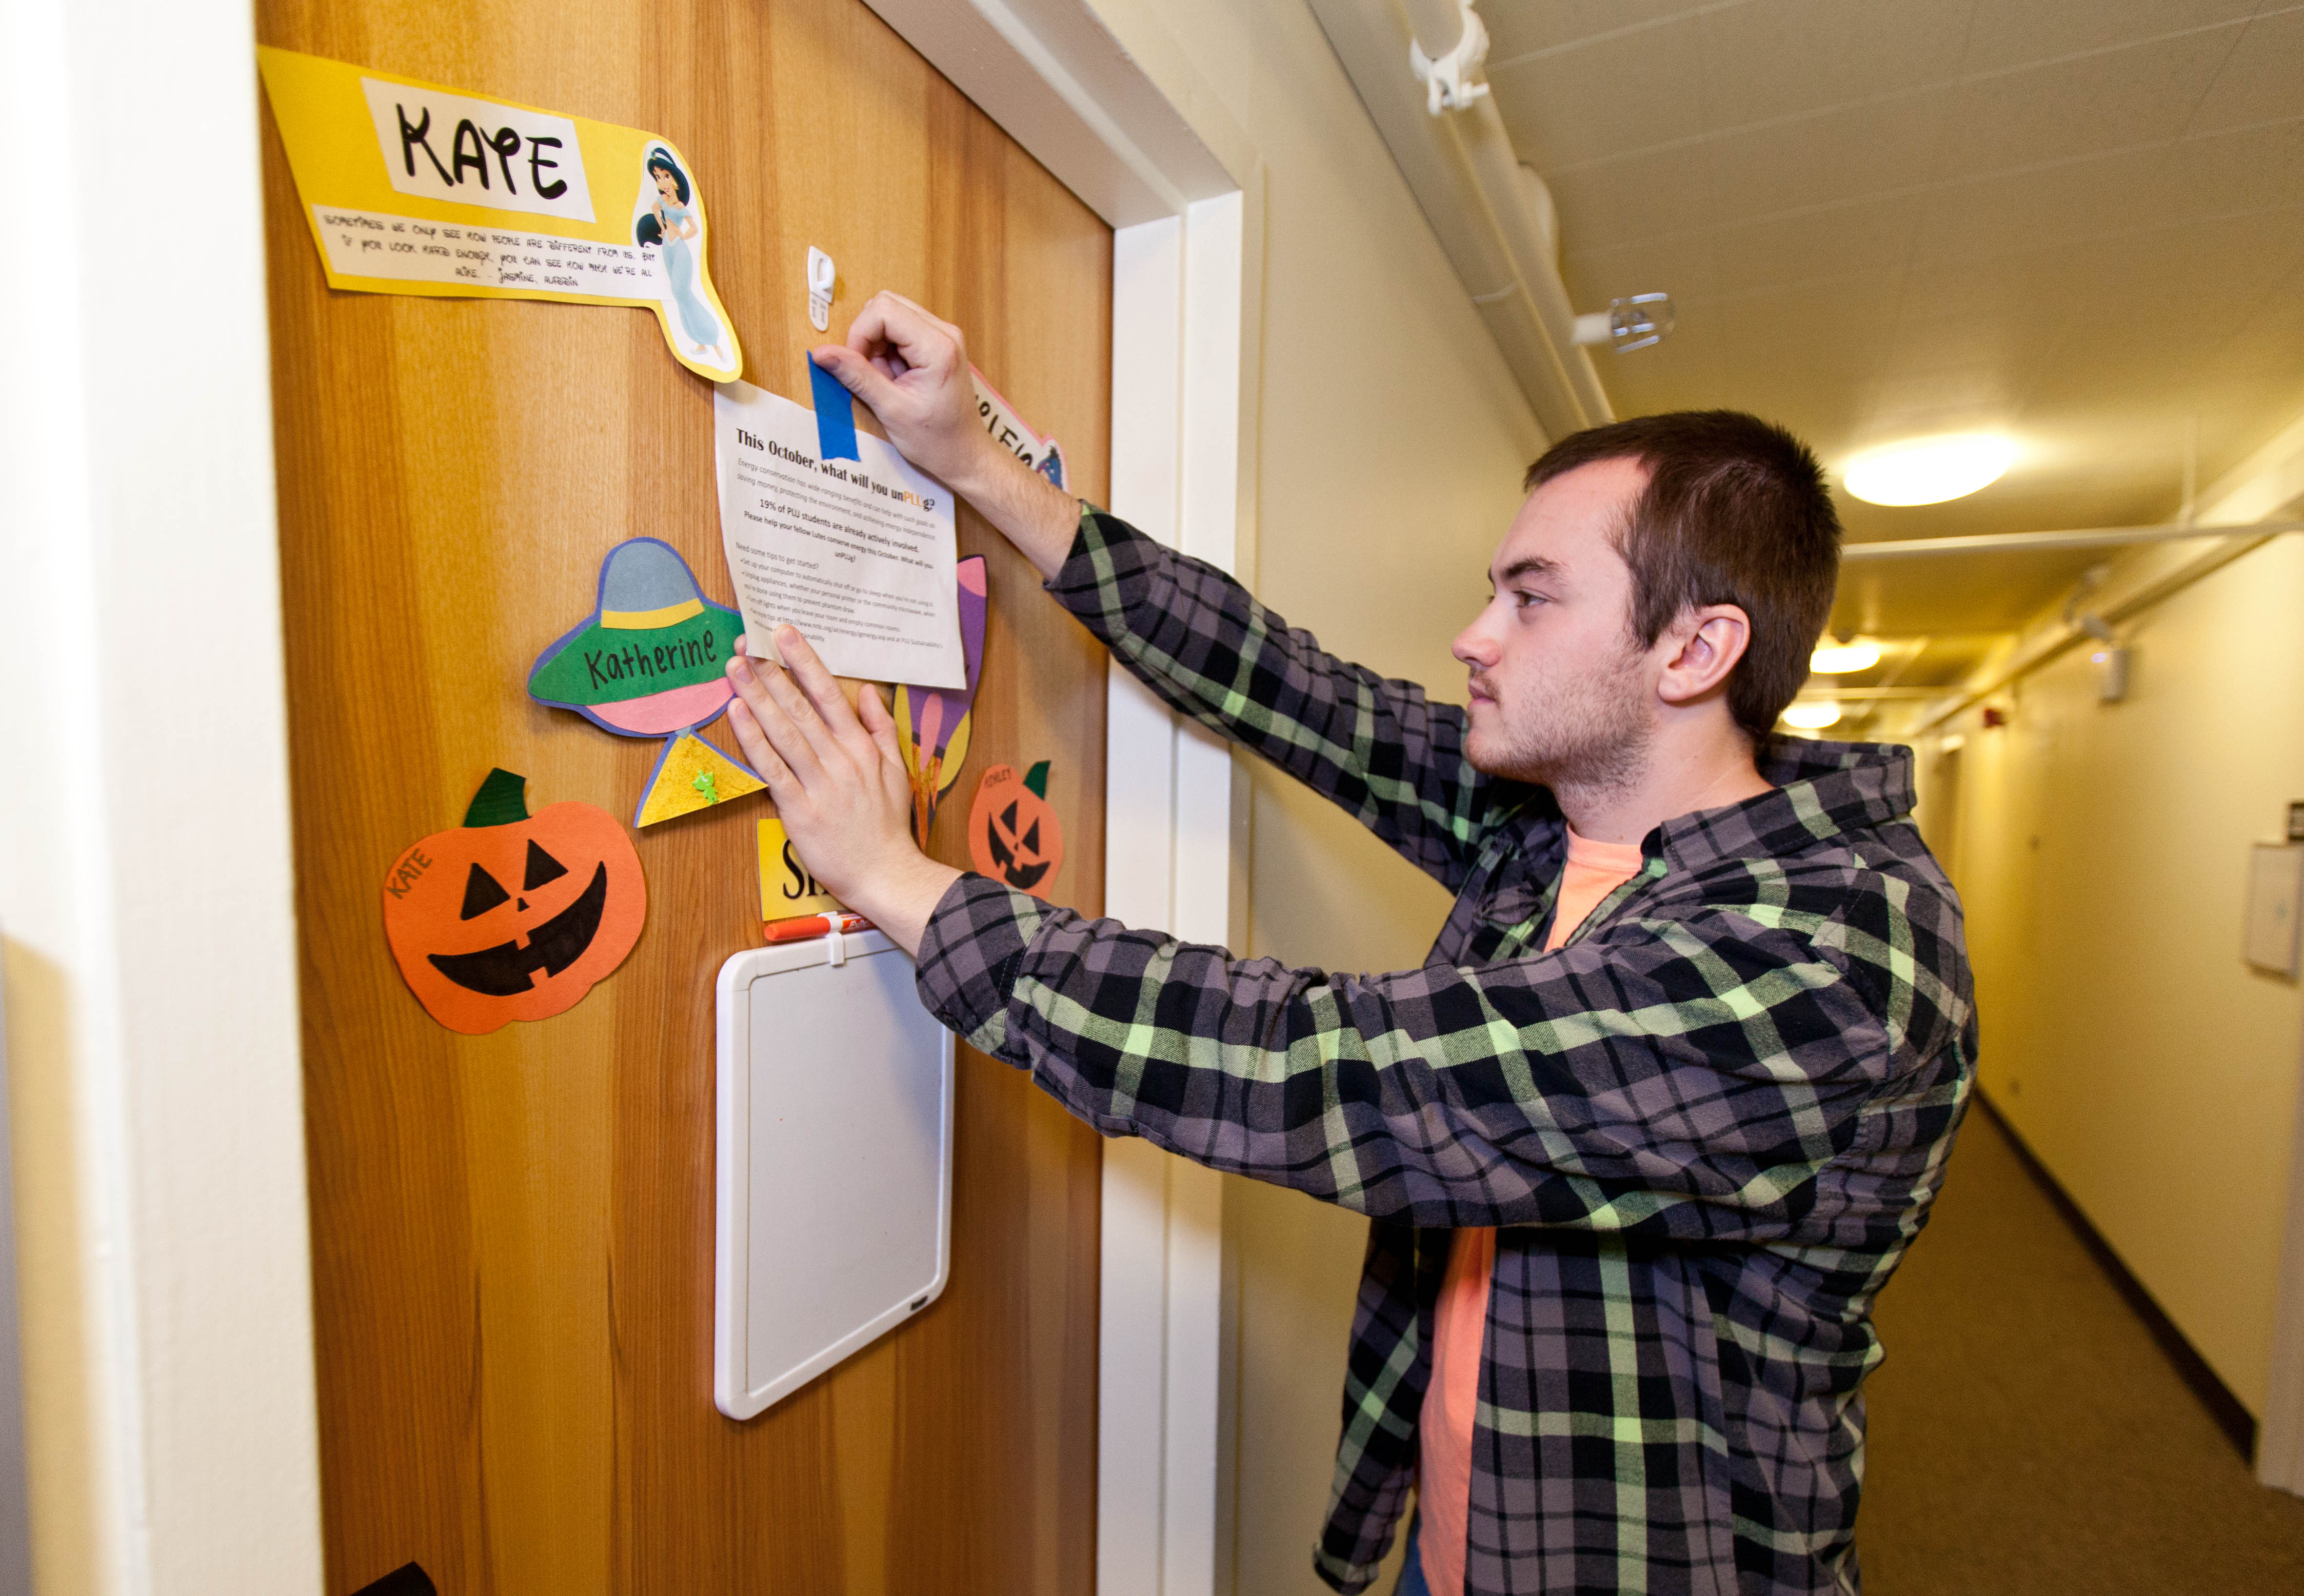 Neil Wagner posts a flyer on the door of a residence-hall room. (Photo: John Froschauer/PLU)